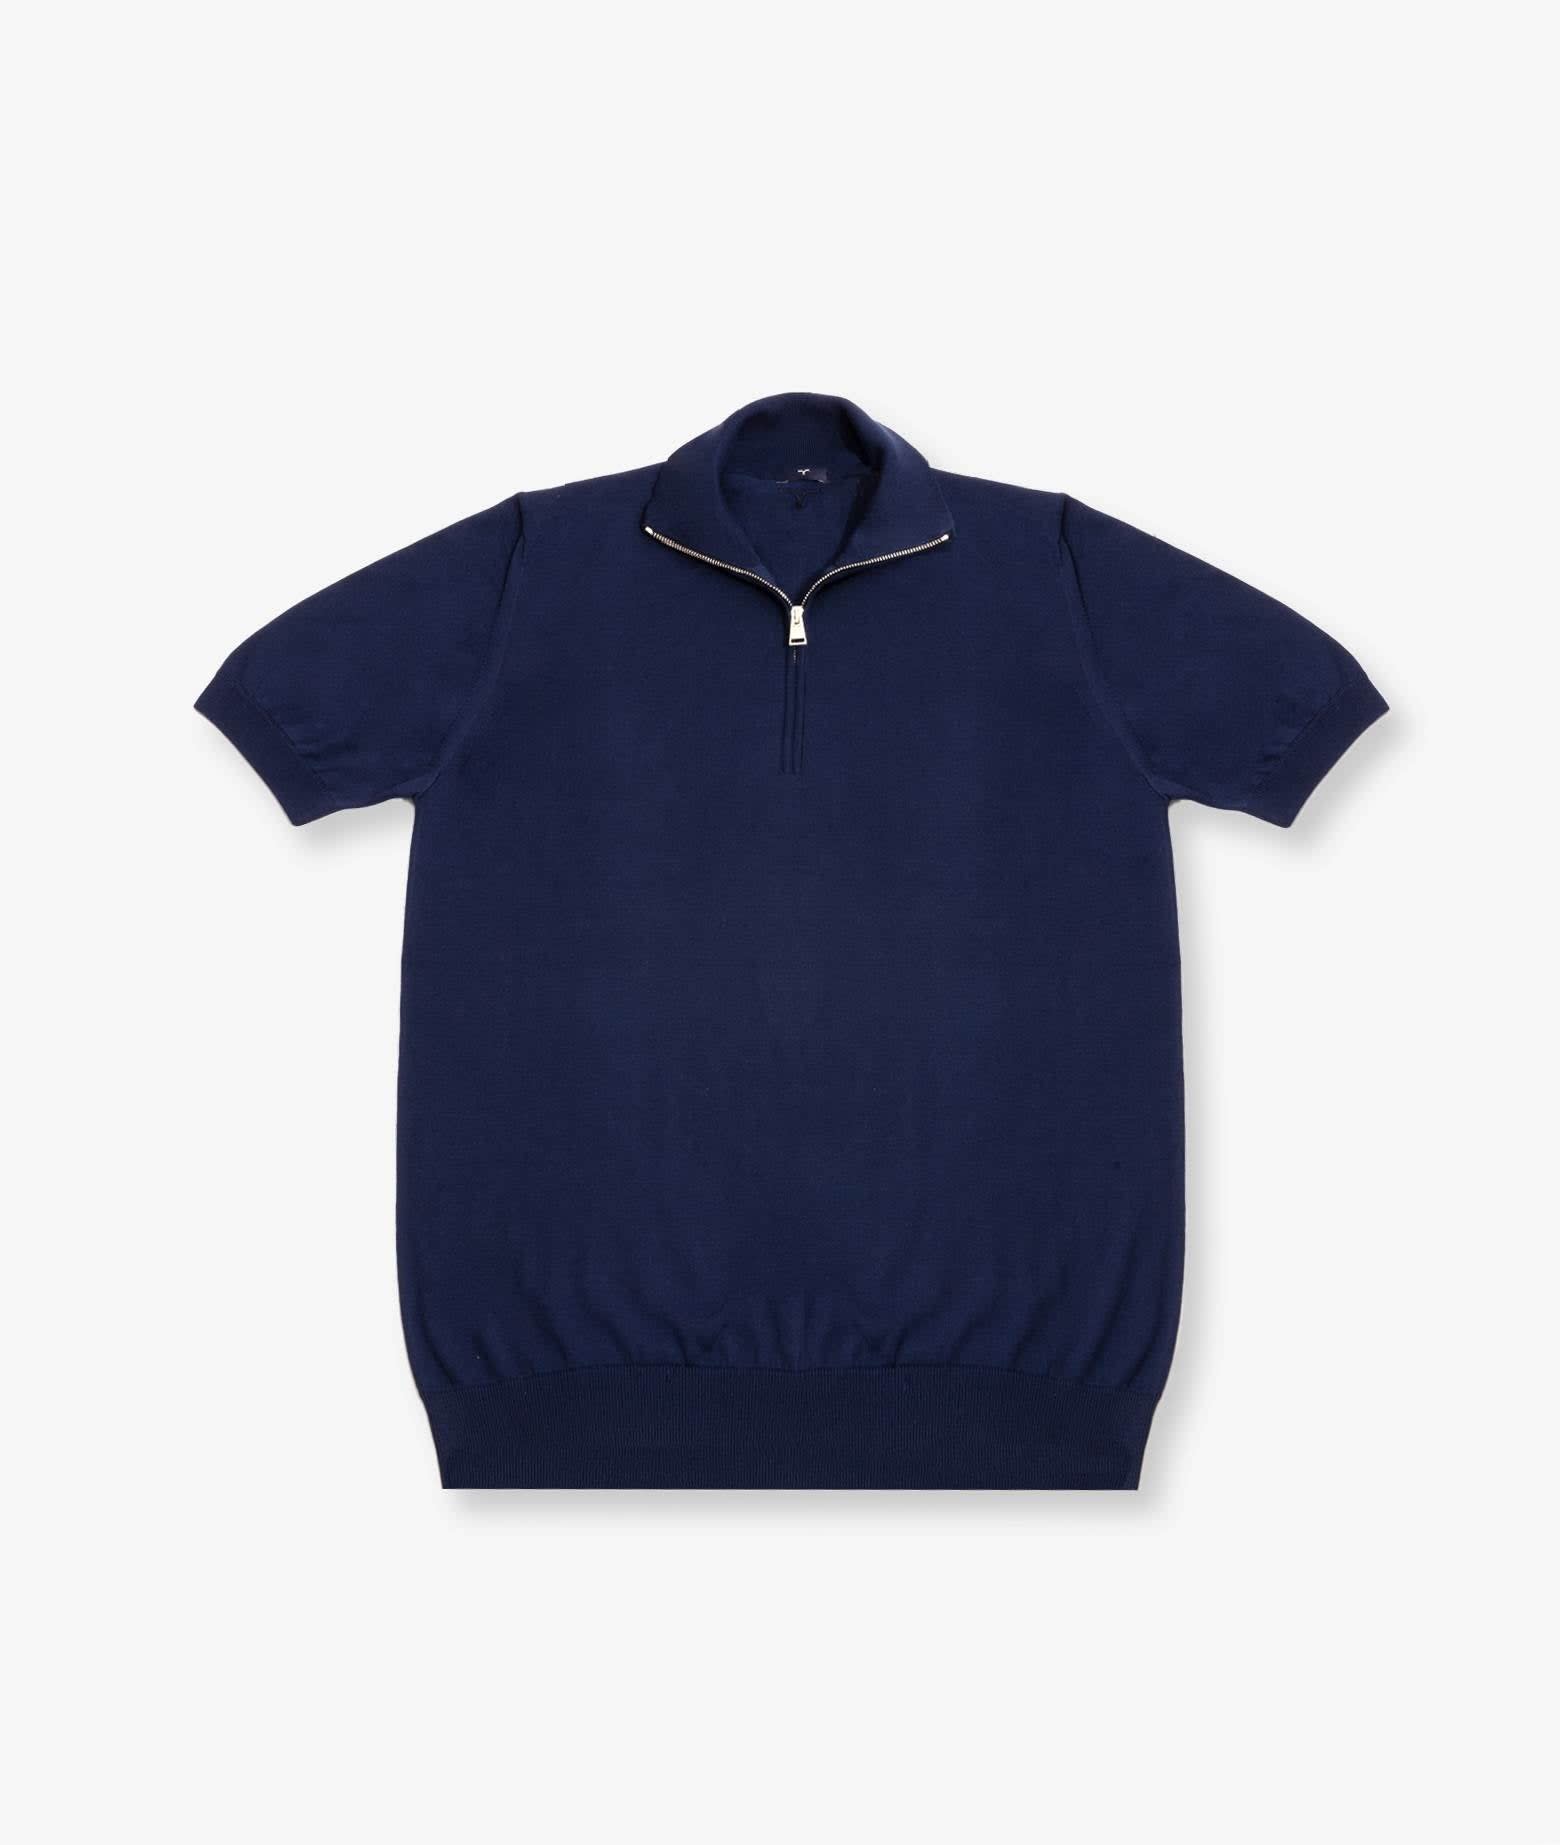 Paul T-shirt With Zip Sweater